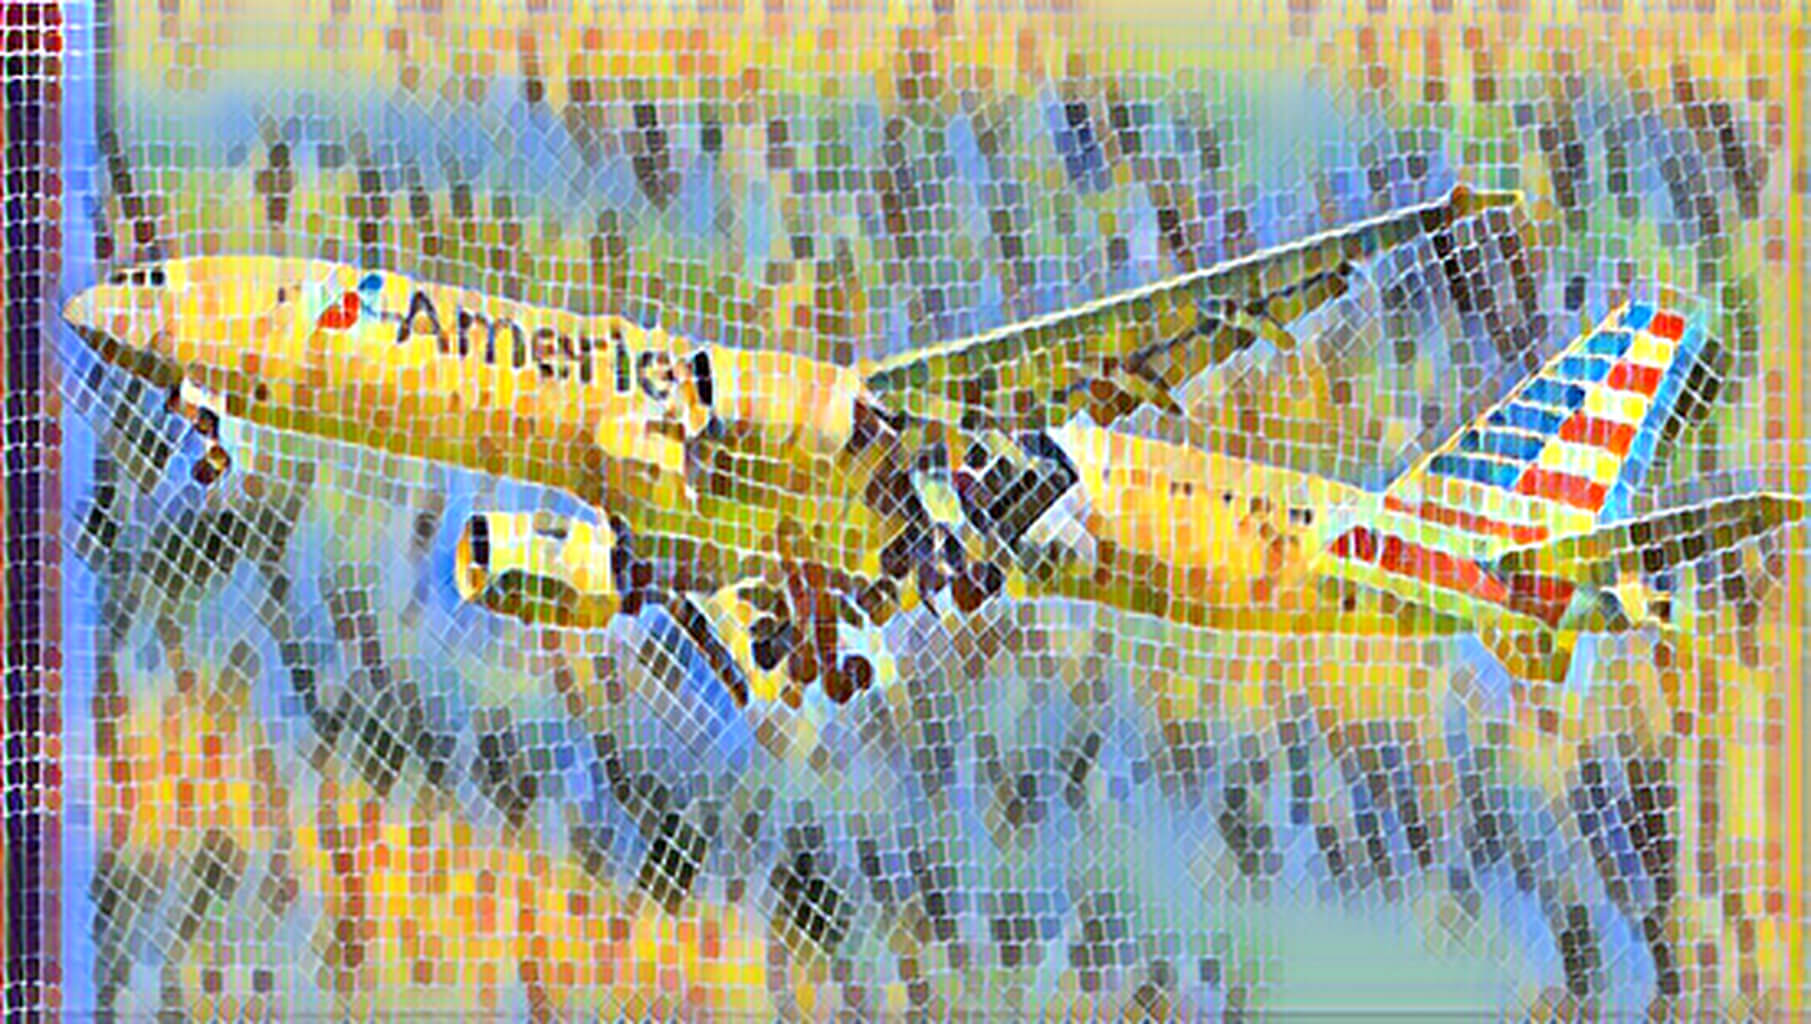   american airlines 2022     